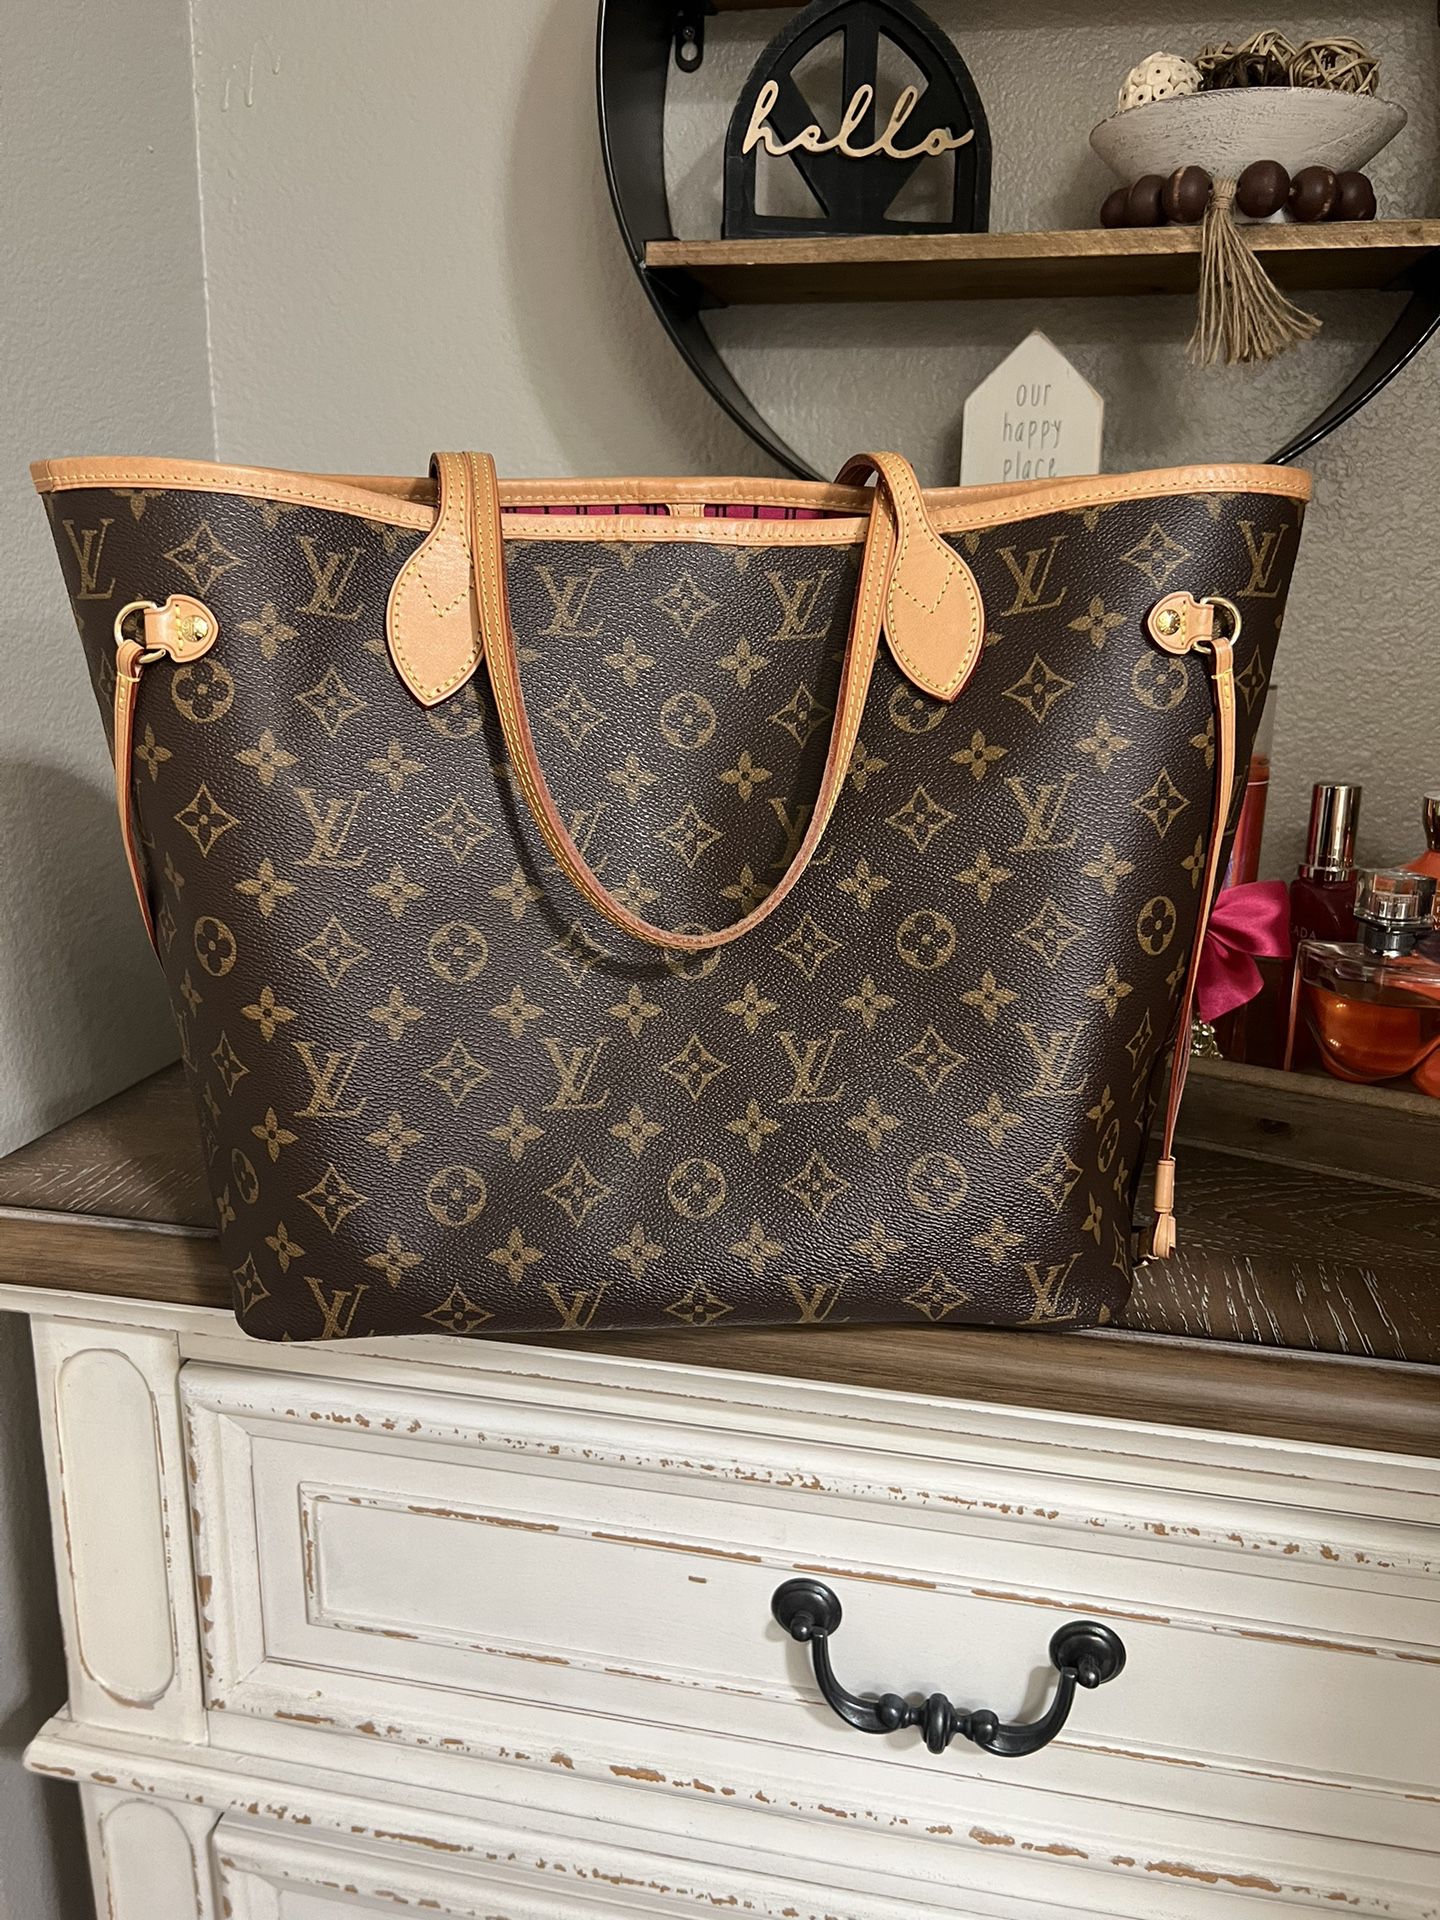 Louis Vuitton Neverfull MM for Sale in Apple Valley, CA - OfferUp